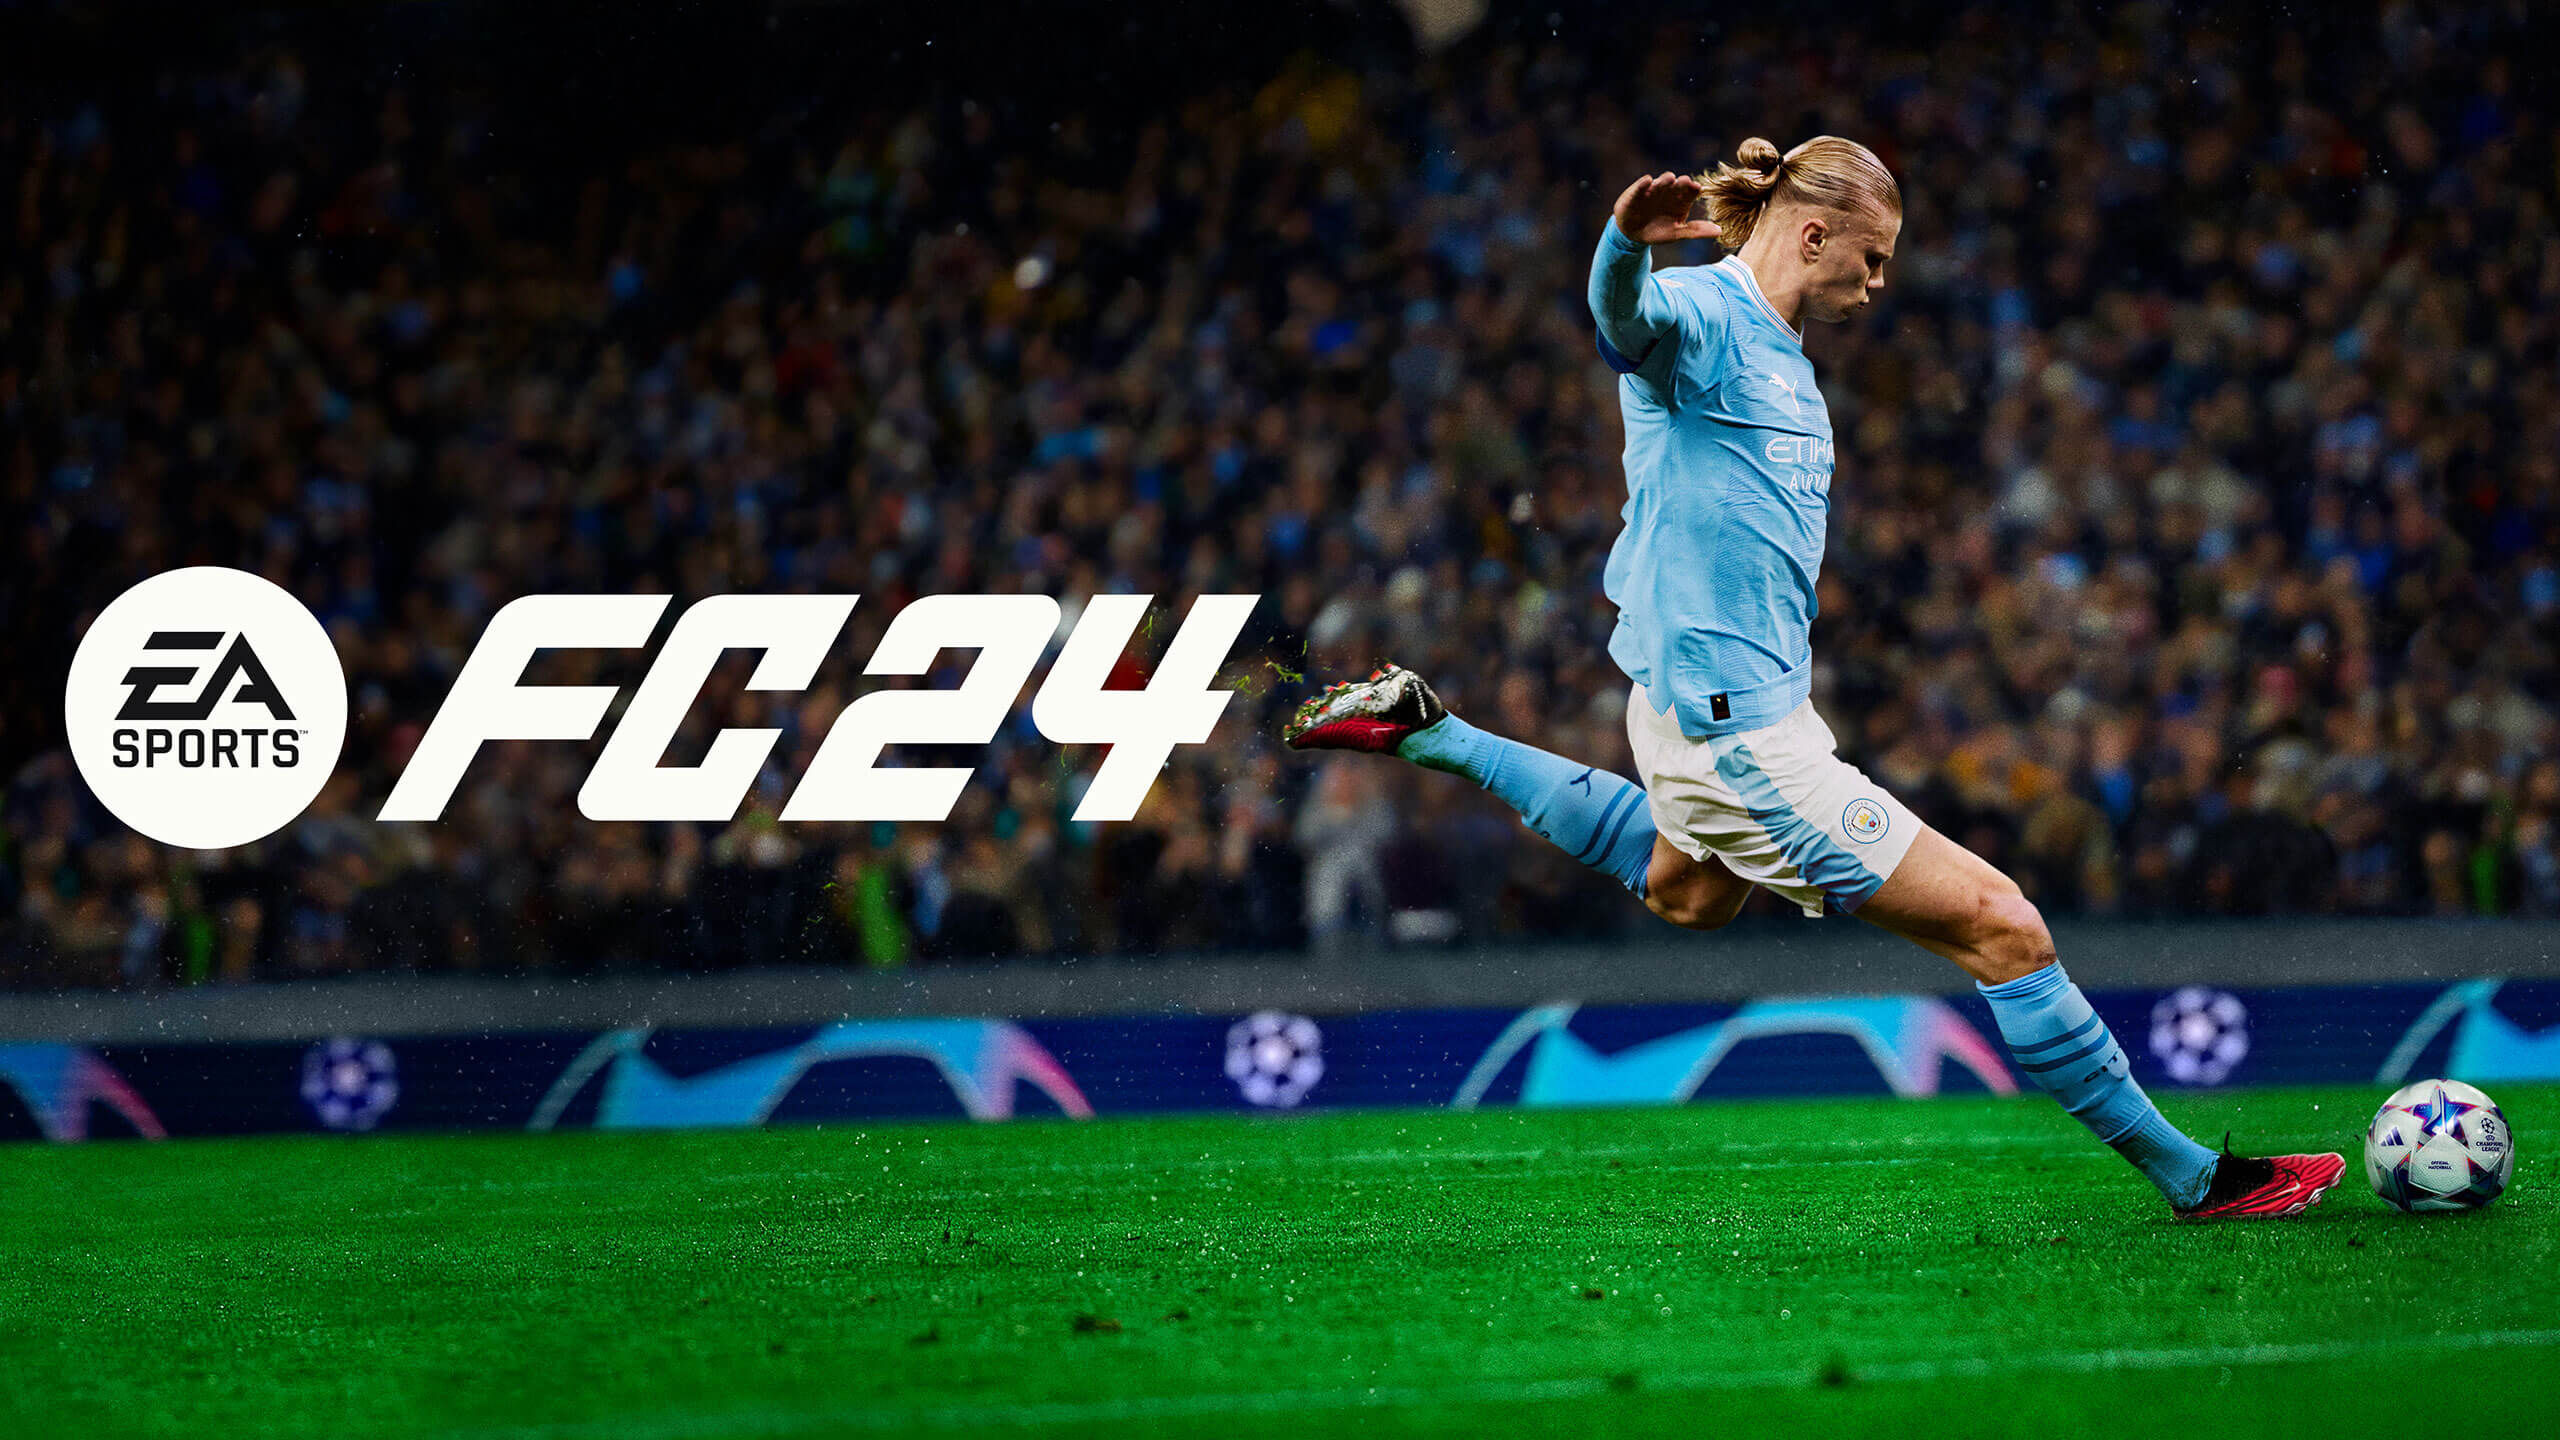 PlayStation Plus Offers EA FC 24 for Free